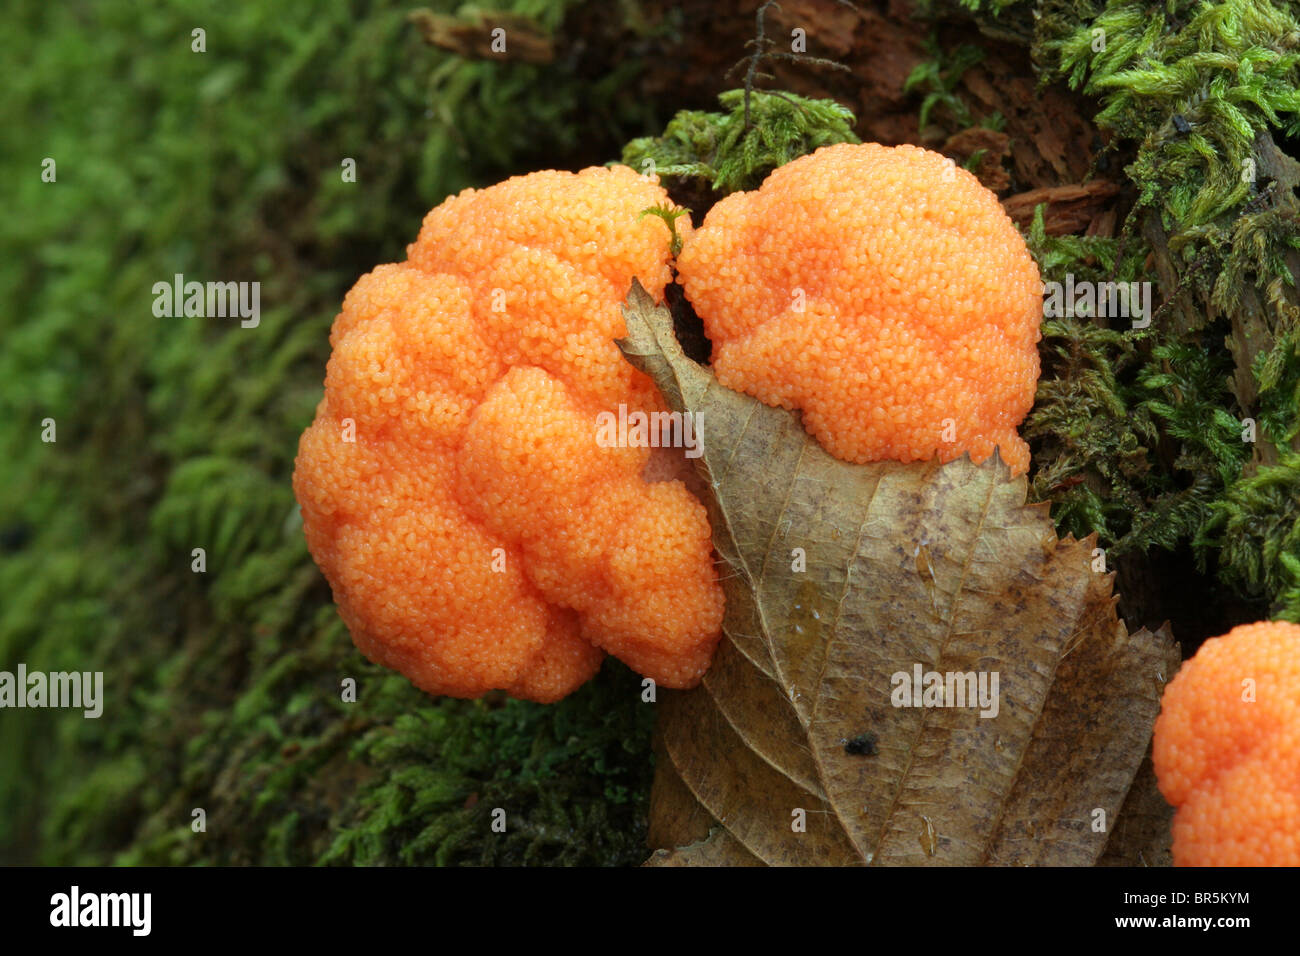 A slime mould or myxomycete (Lindbladia effusa var simplex) fruiting bodies forming on a fallen tree, UK. Stock Photo